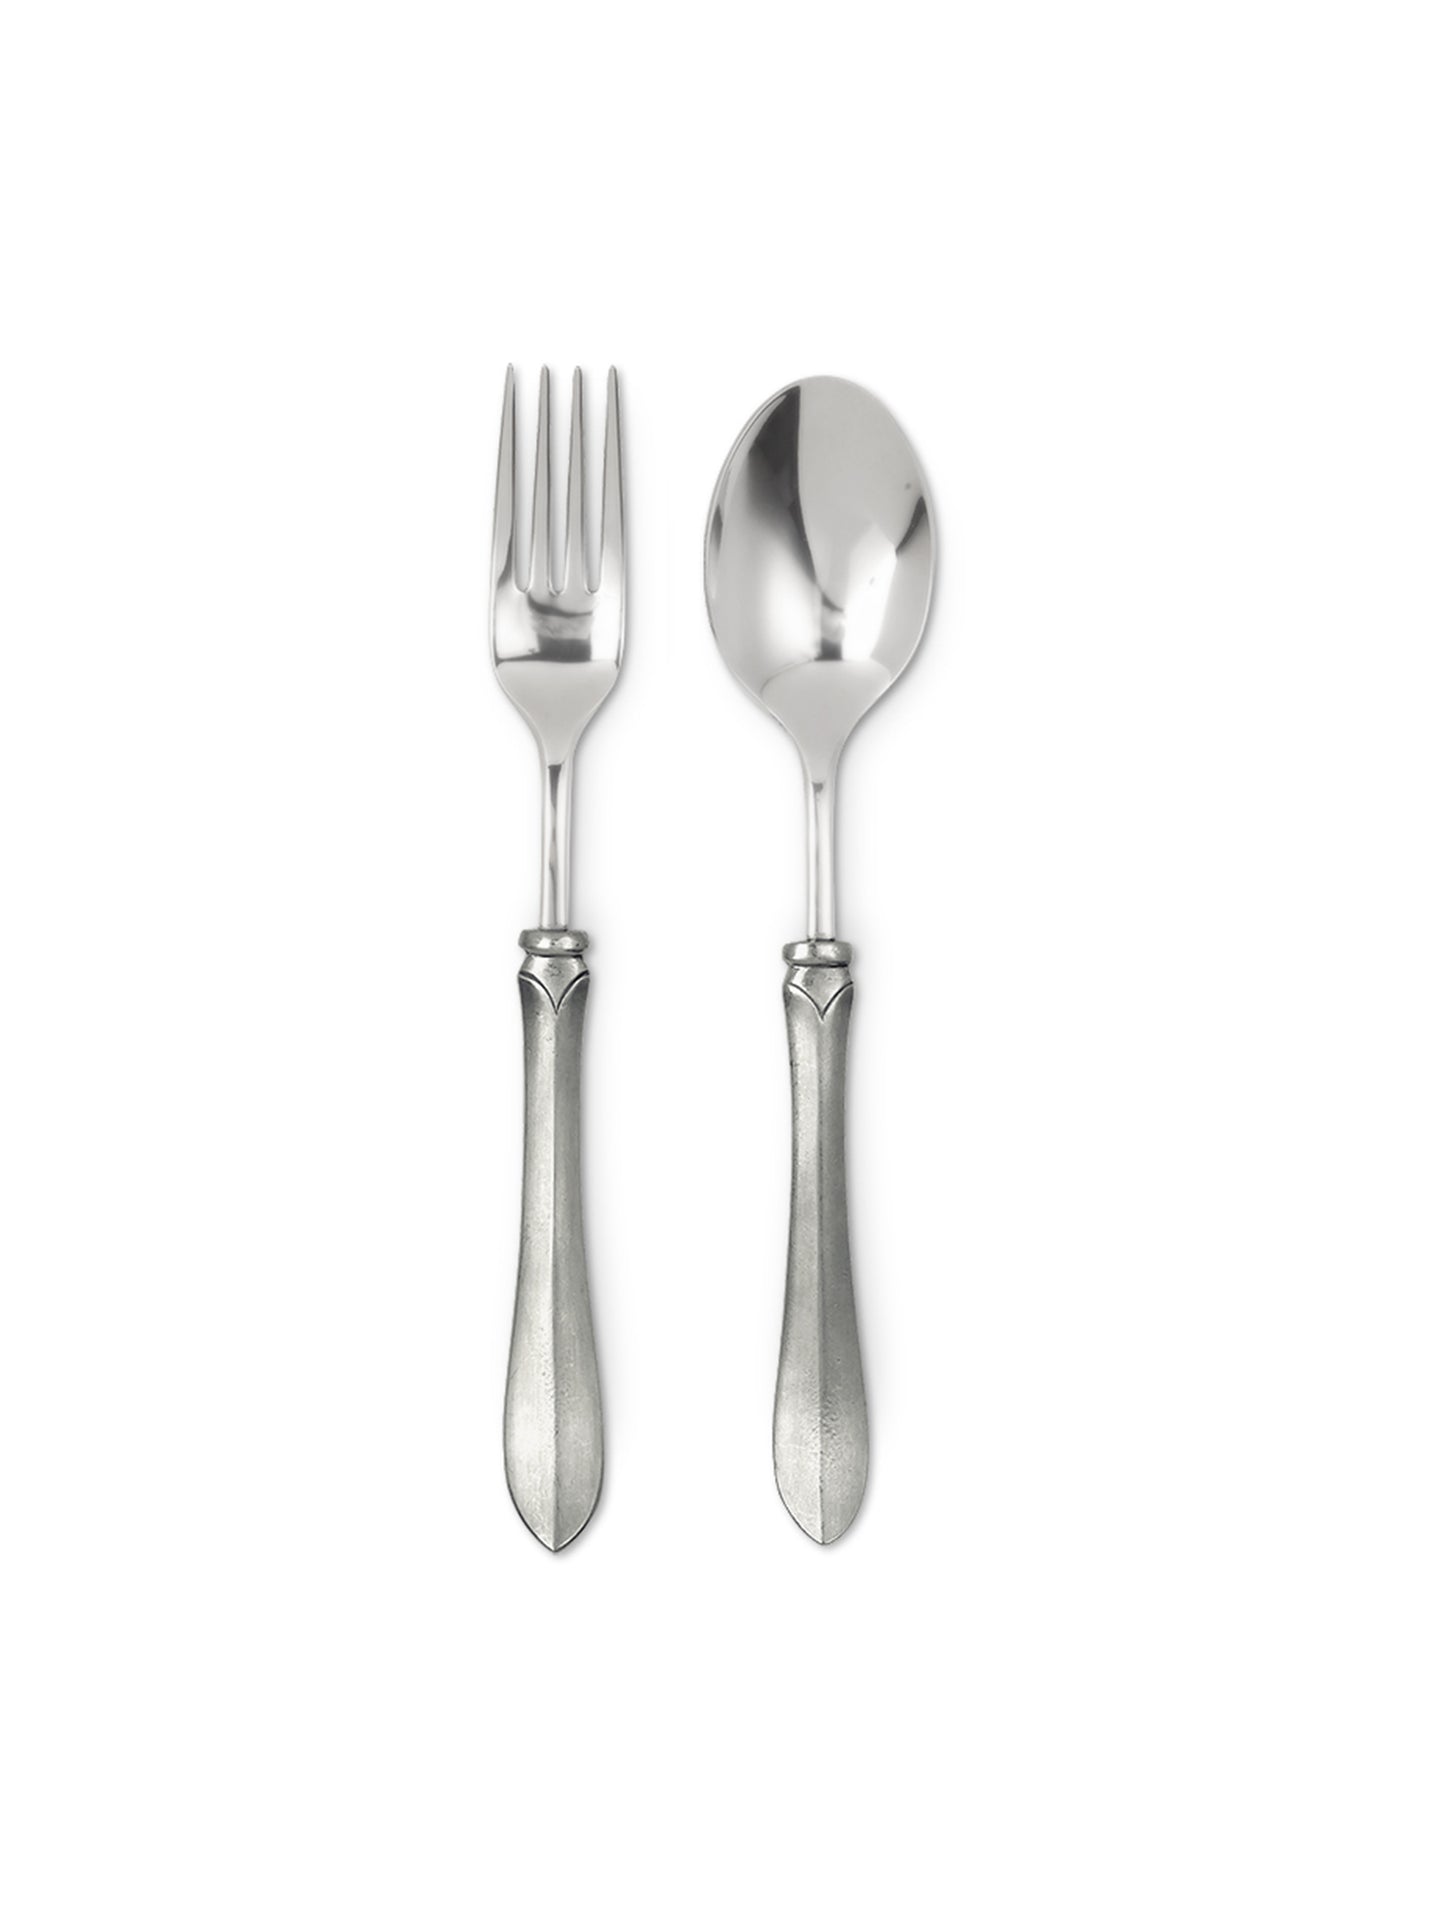 MATCH Pewter Sofia Serving Fork & Spoon Weston Table